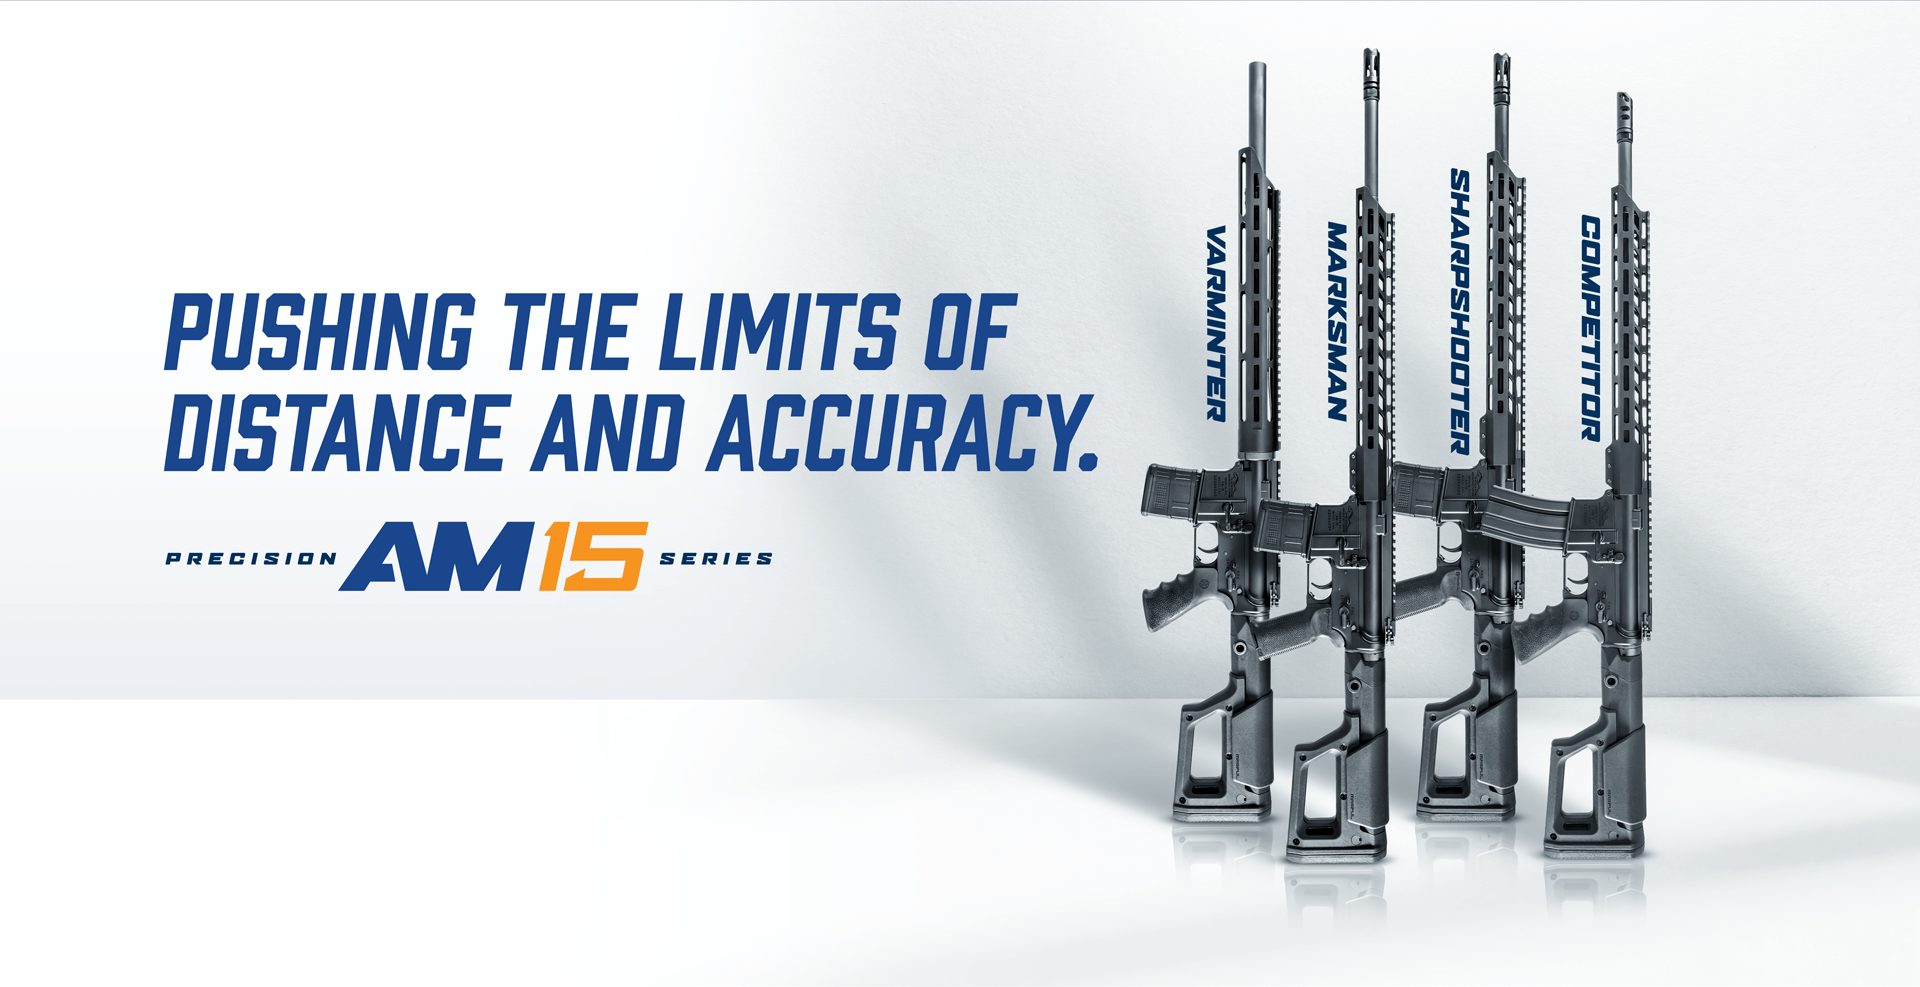 Introducing the all-new AM-15 Precision Series.